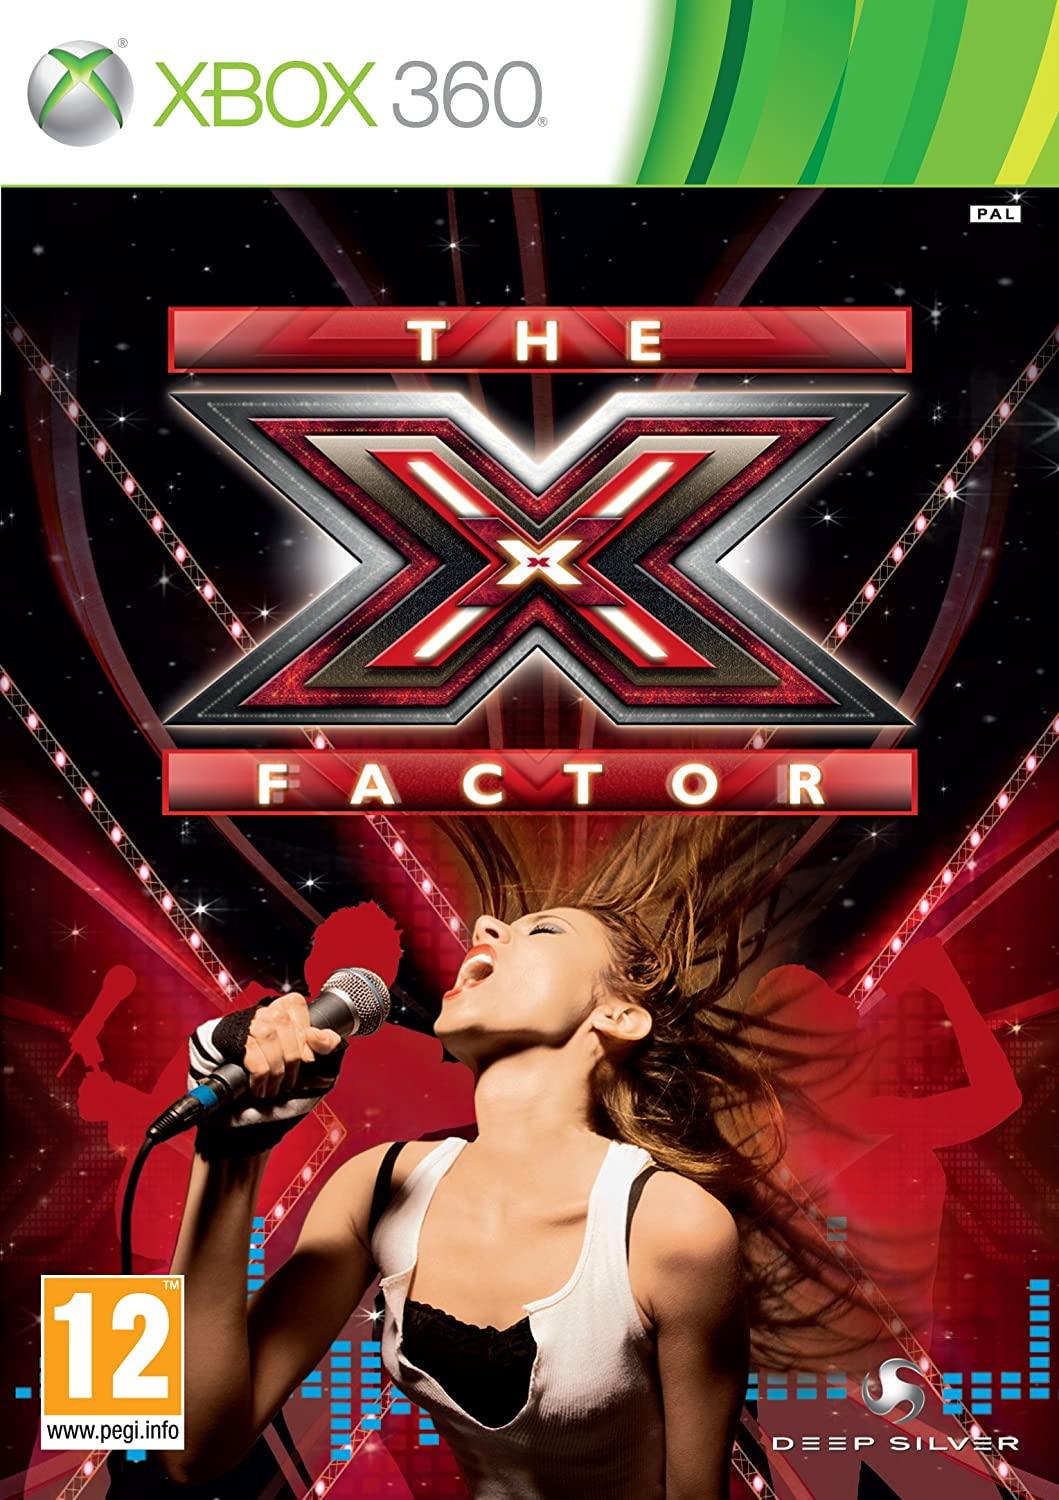 THE X FACTOR XBOX360 GAME BRAND NEW WITH SEALED PACK. - saynama